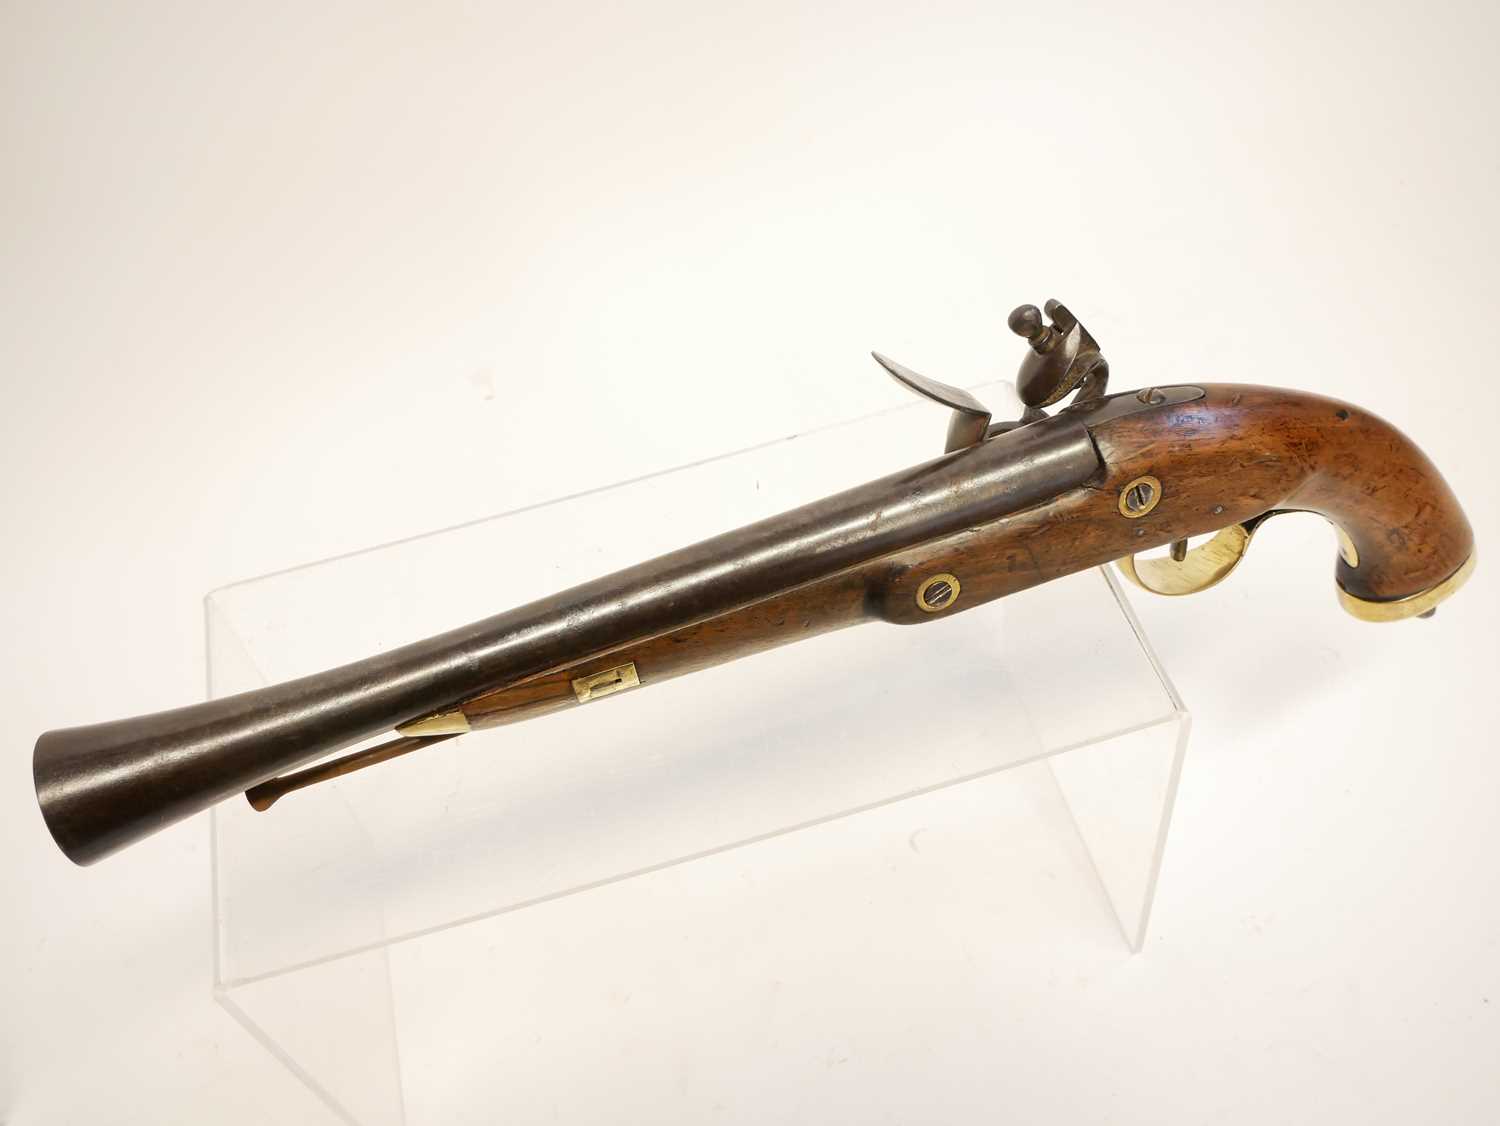 Belgian flintlock blunderbuss pistol, 13 inch barrel with flaring muzzle, stamped with Liege proof - Image 7 of 9